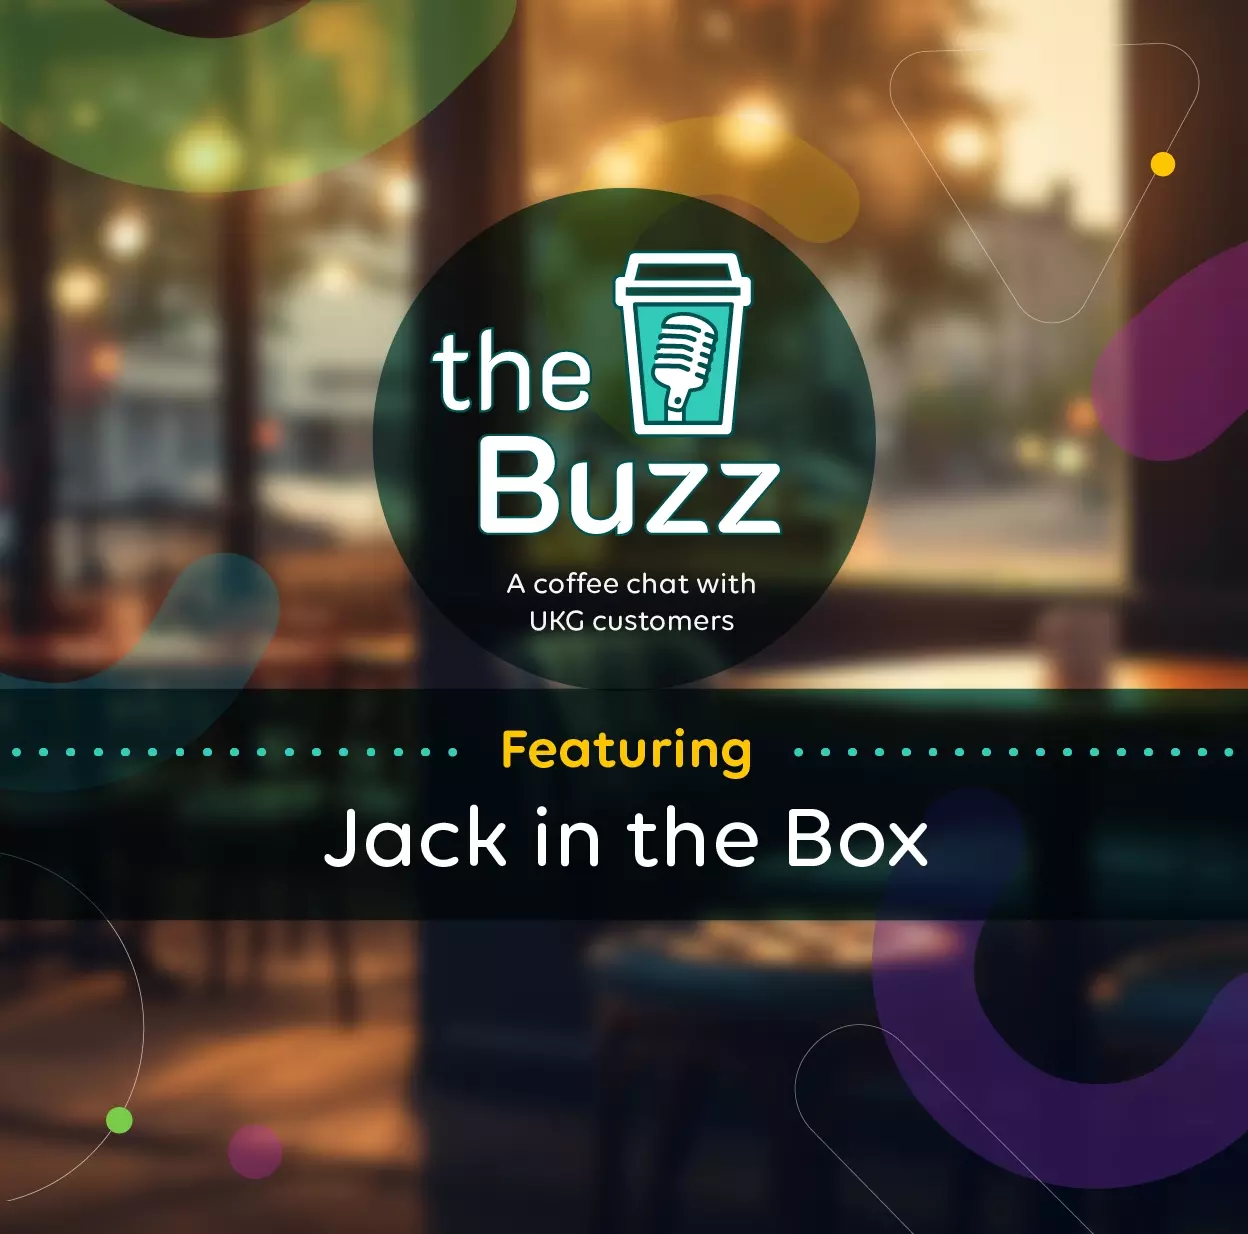 The Buzz: A Coffee Chat Featuring Jack in the Box